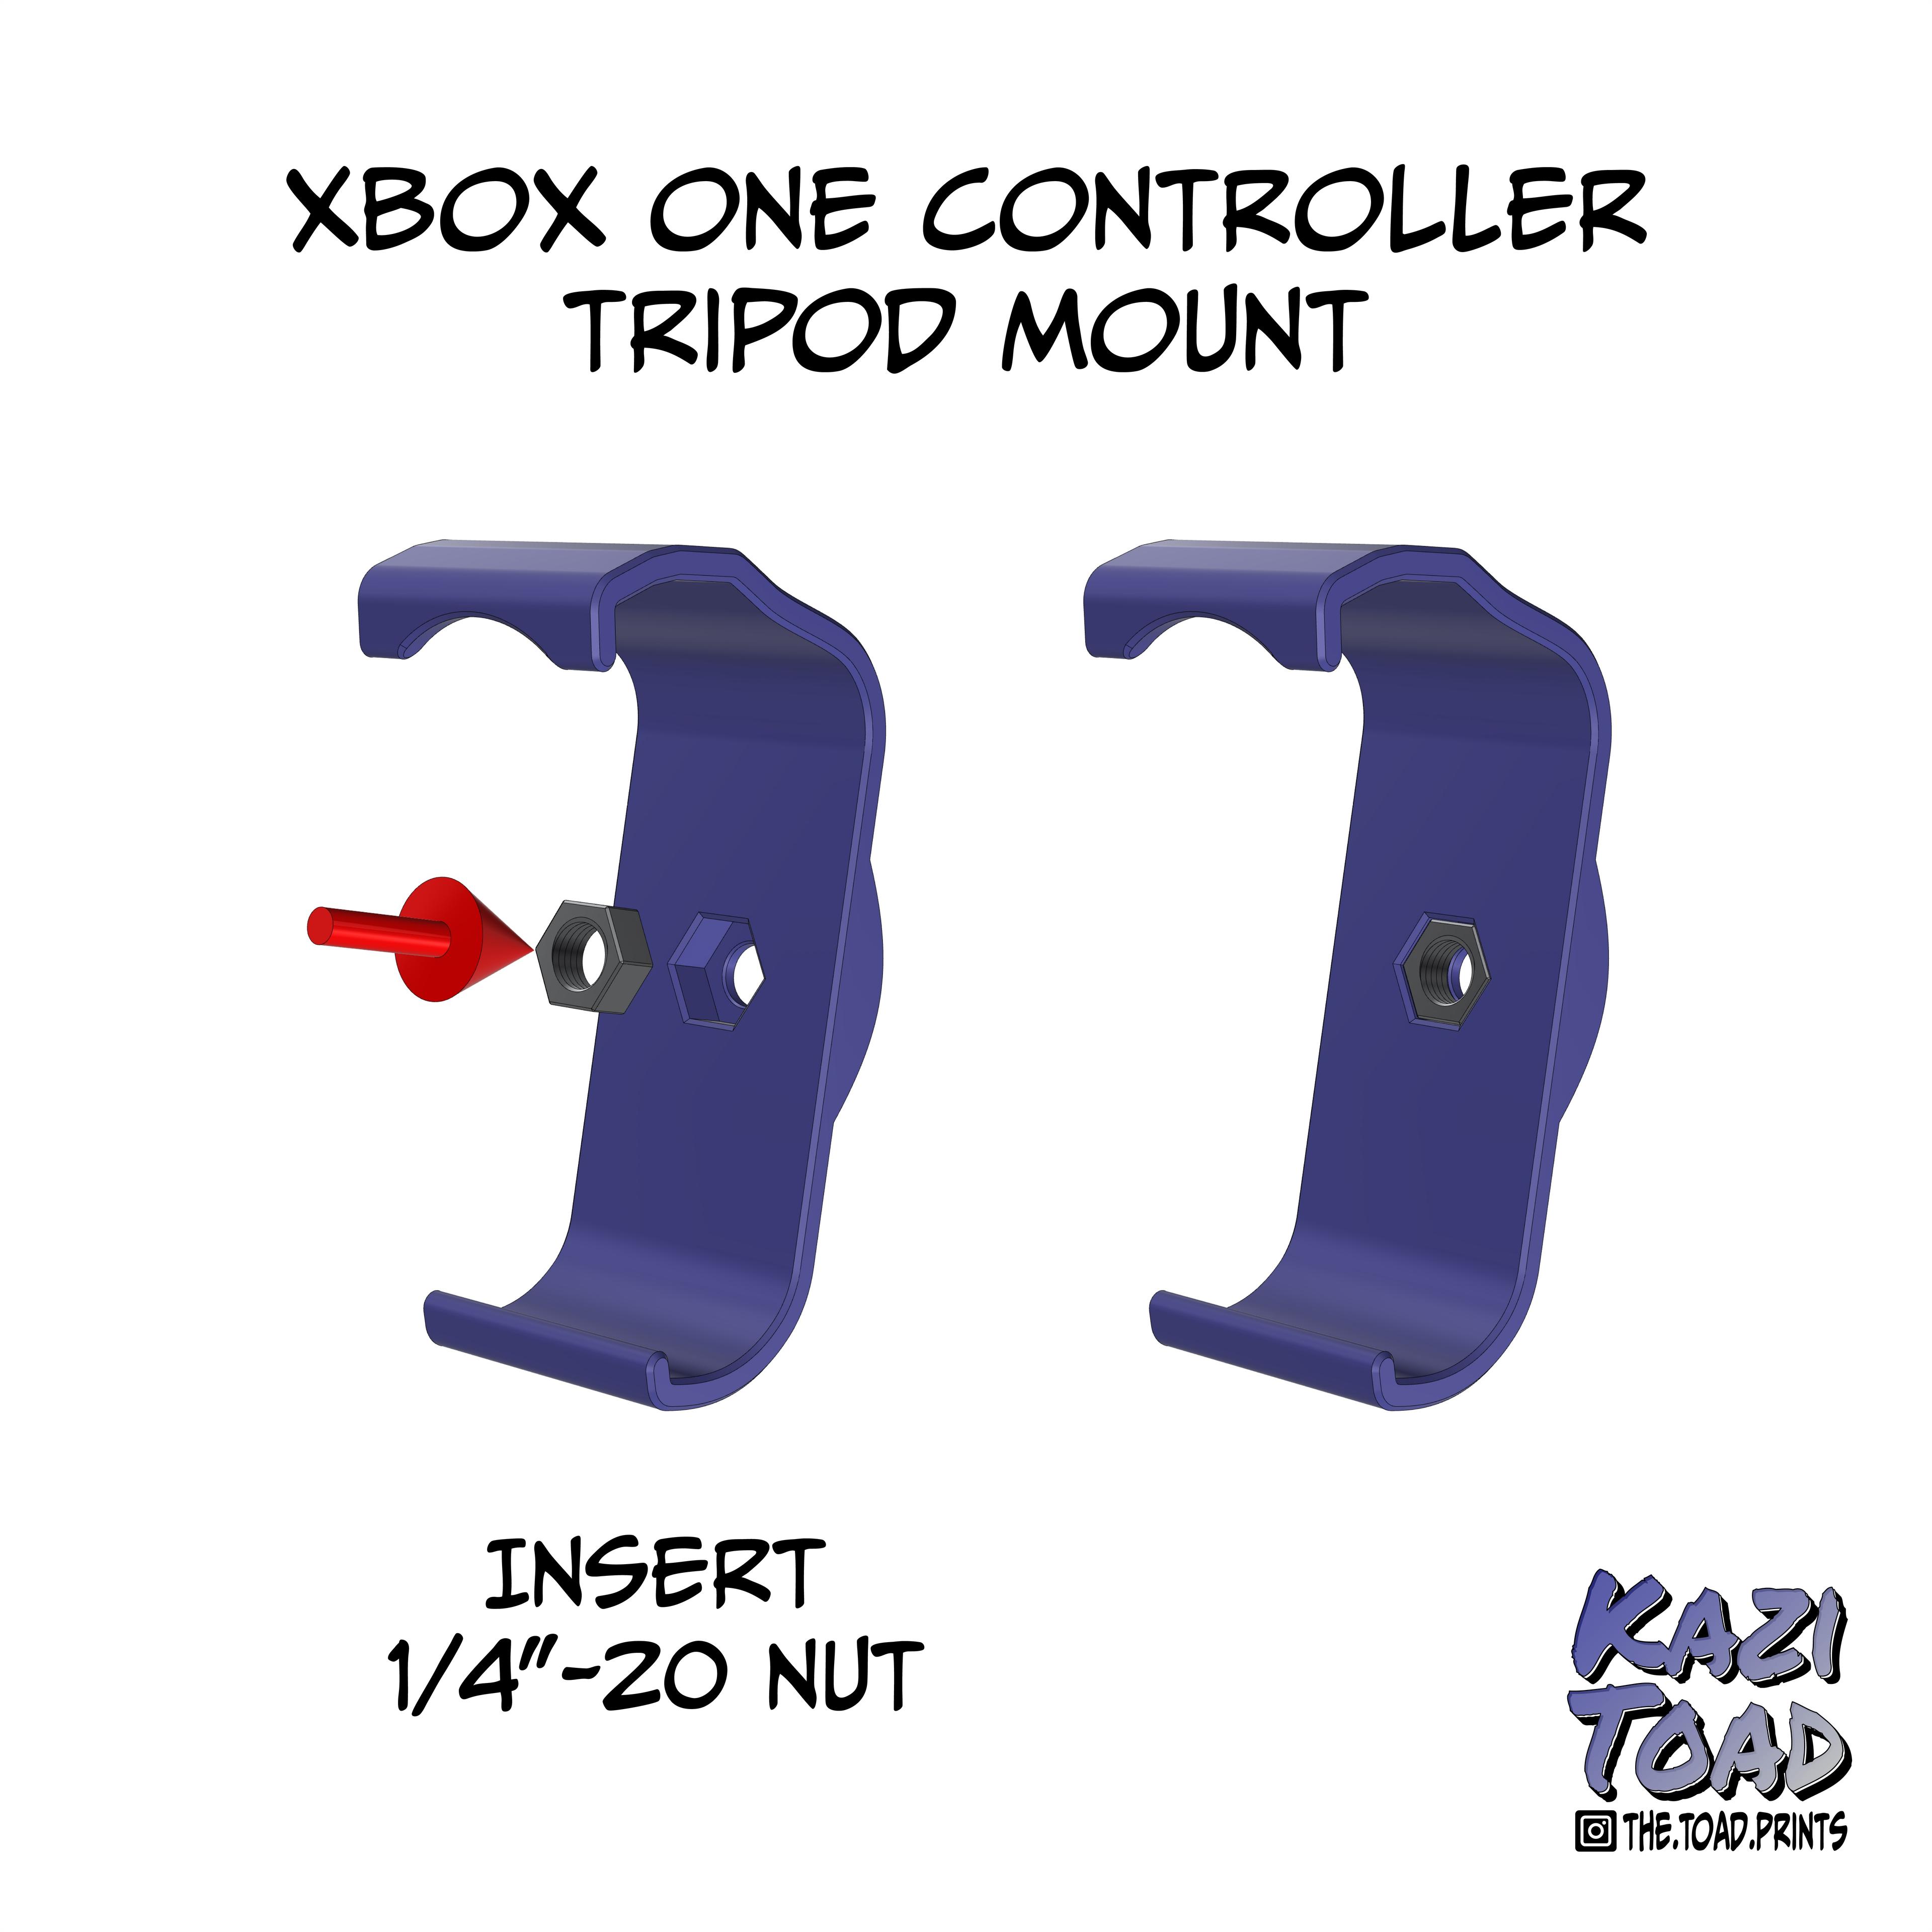 XBox One Controller accessibility mount 3d model